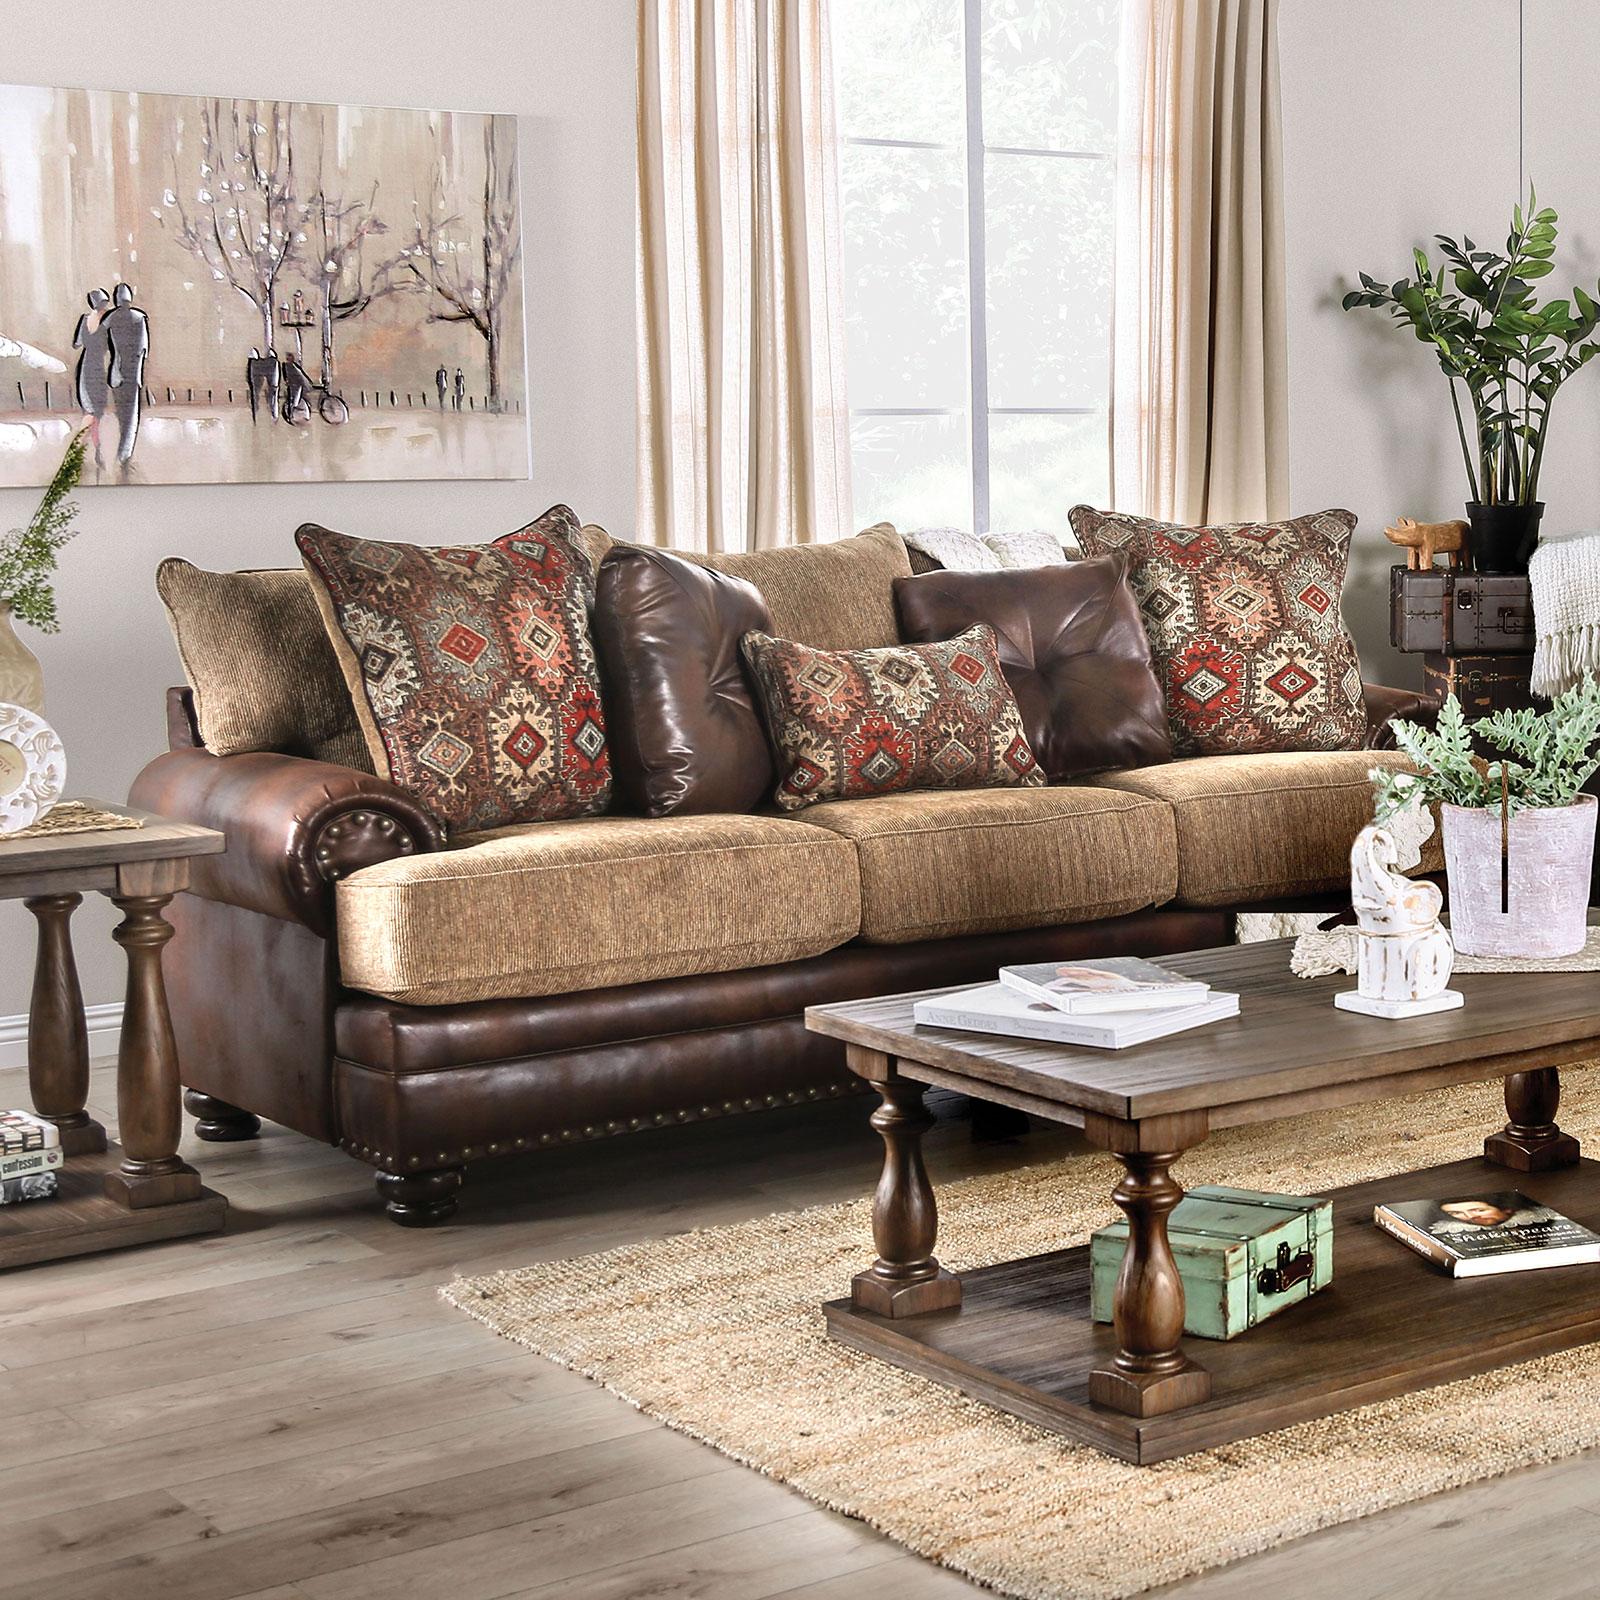 Transitional Sofa FLETCHER SM5148-SF SM5148-SF in Brown Leatherette